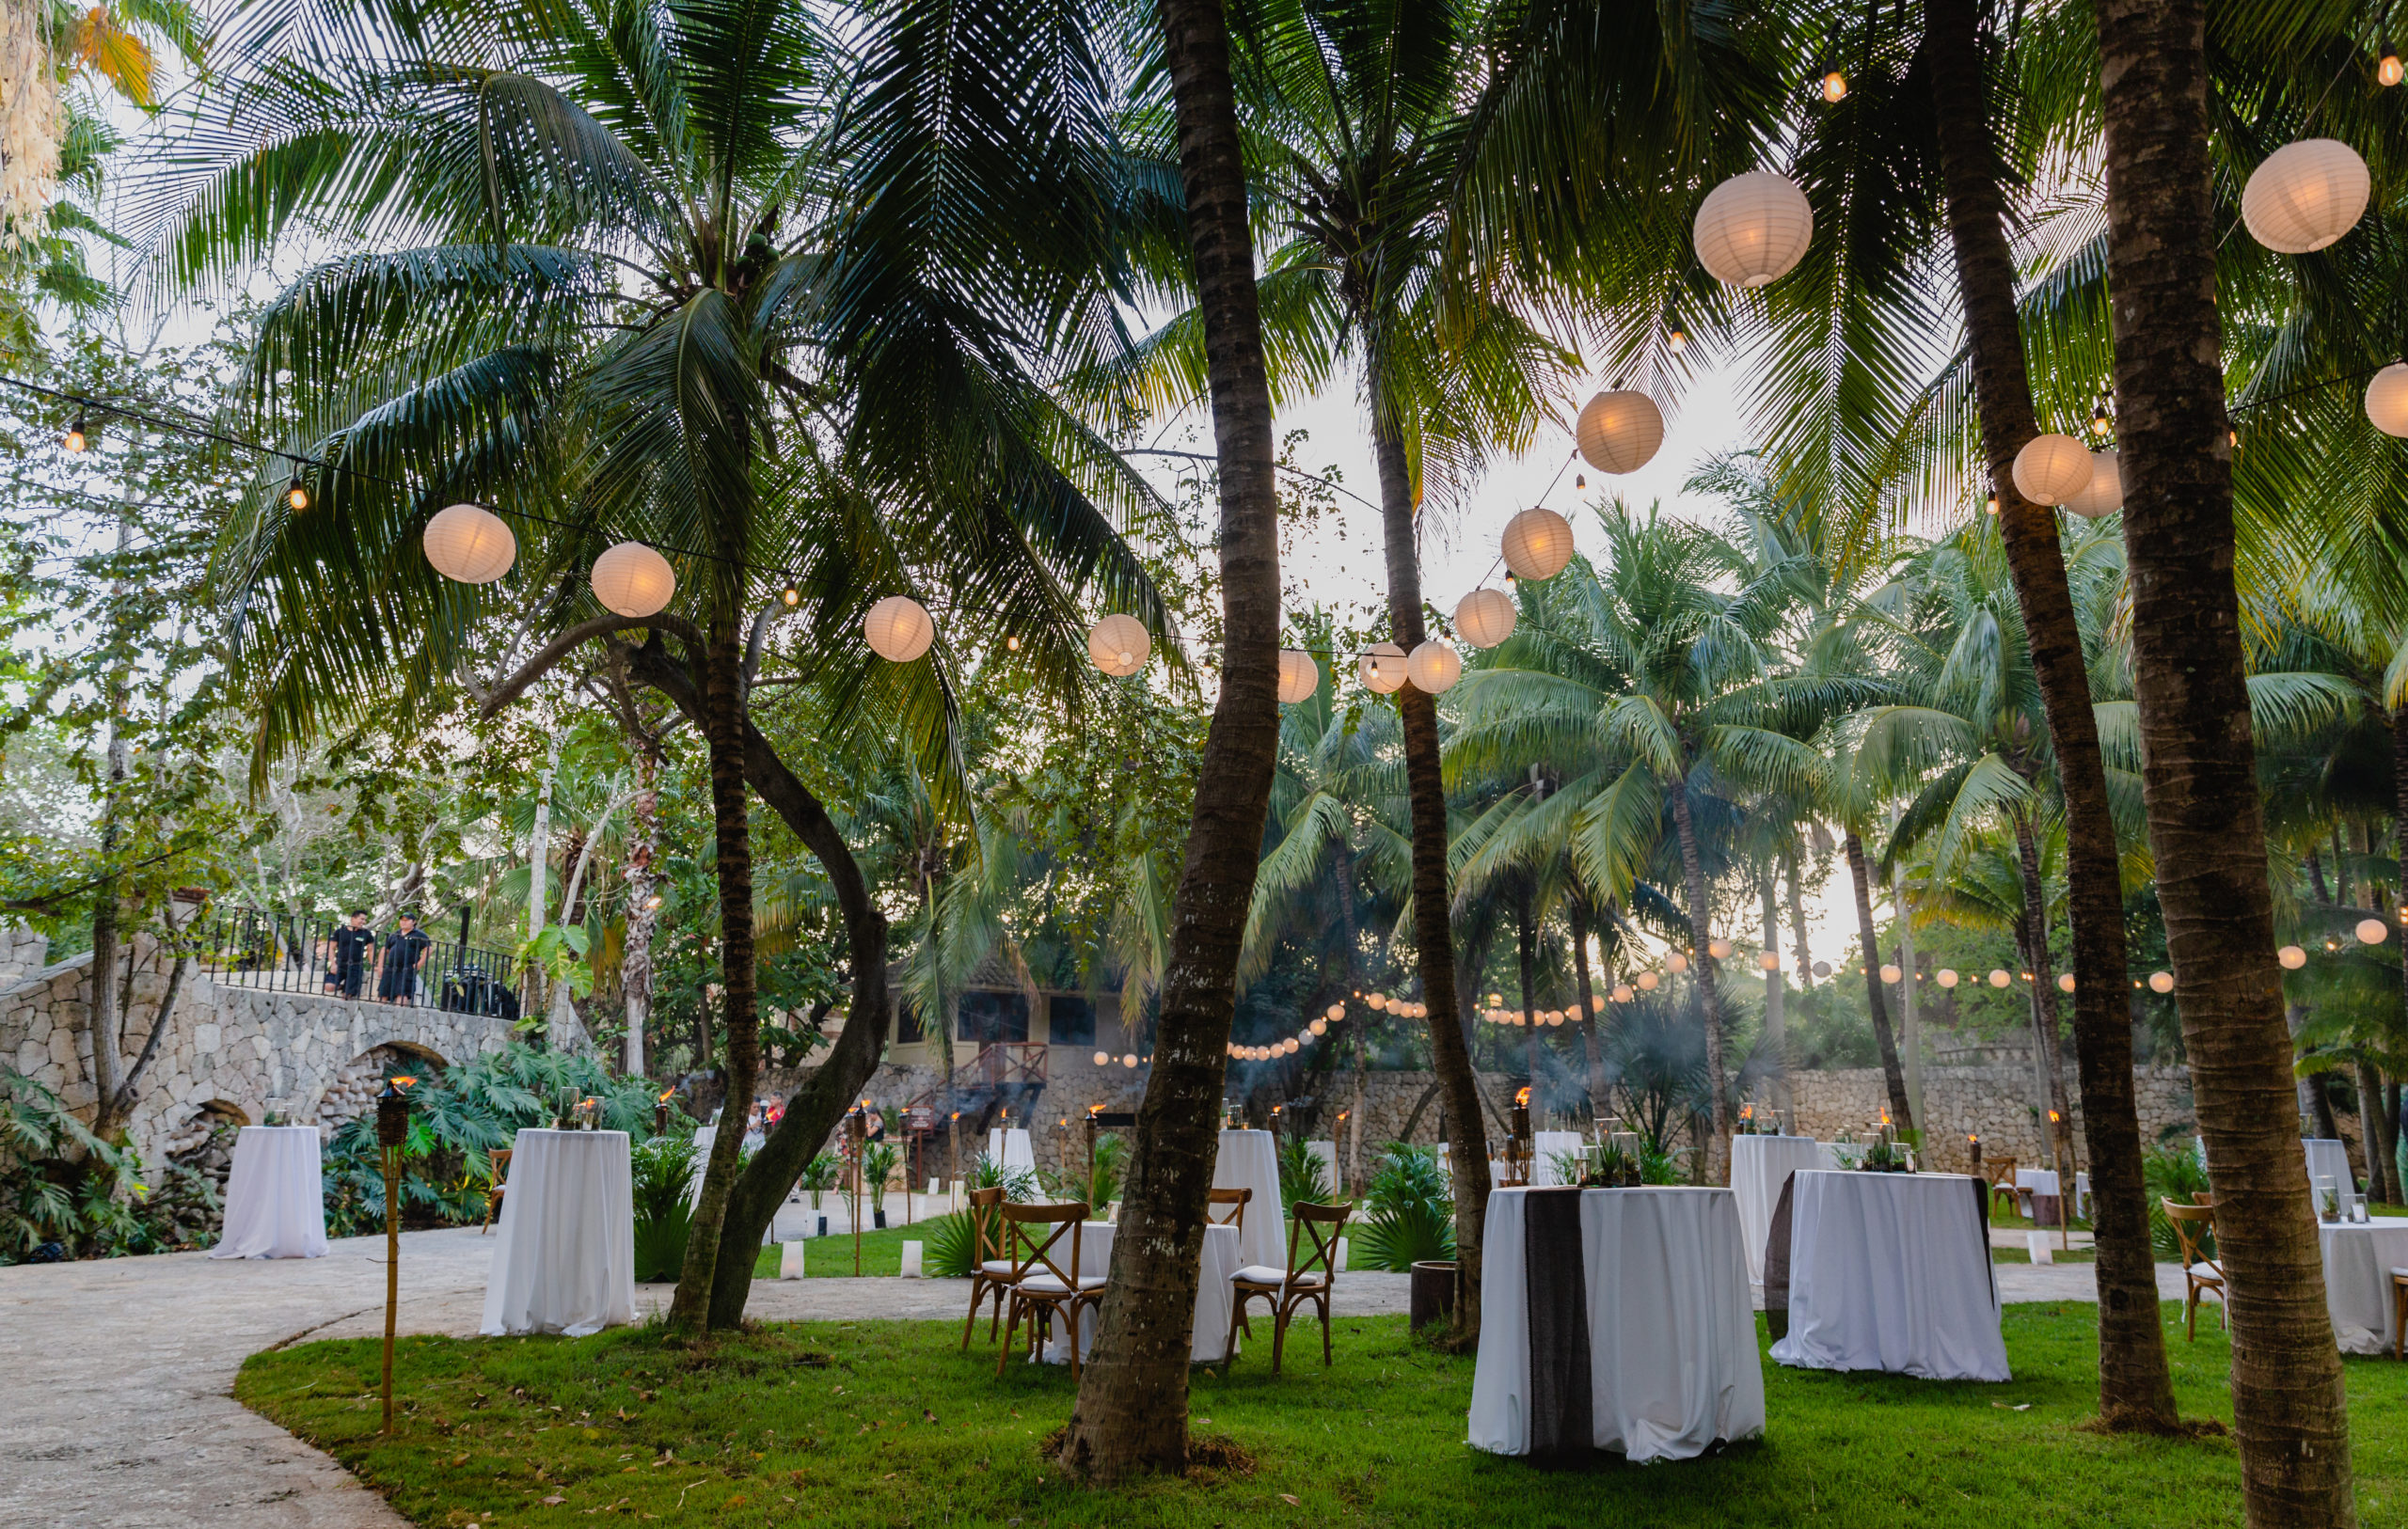 photo of palm trees, hanging lanterns and tables with white linen